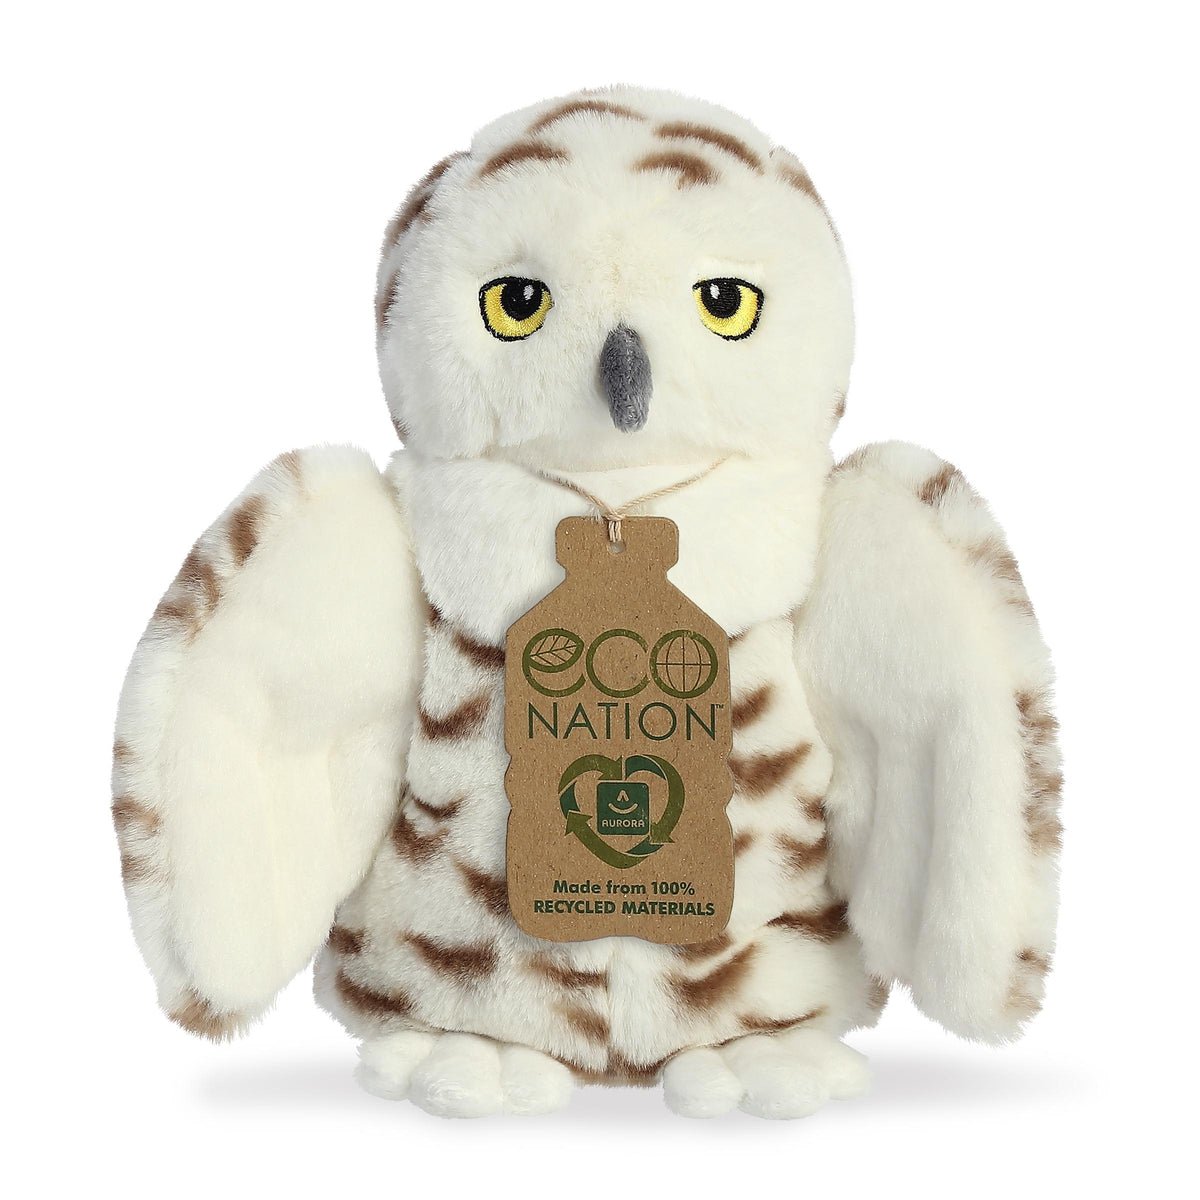 A magical owl plush that has a white and brown coat resembling feathers, gentle embroidered eyes, and an eco-nation tag